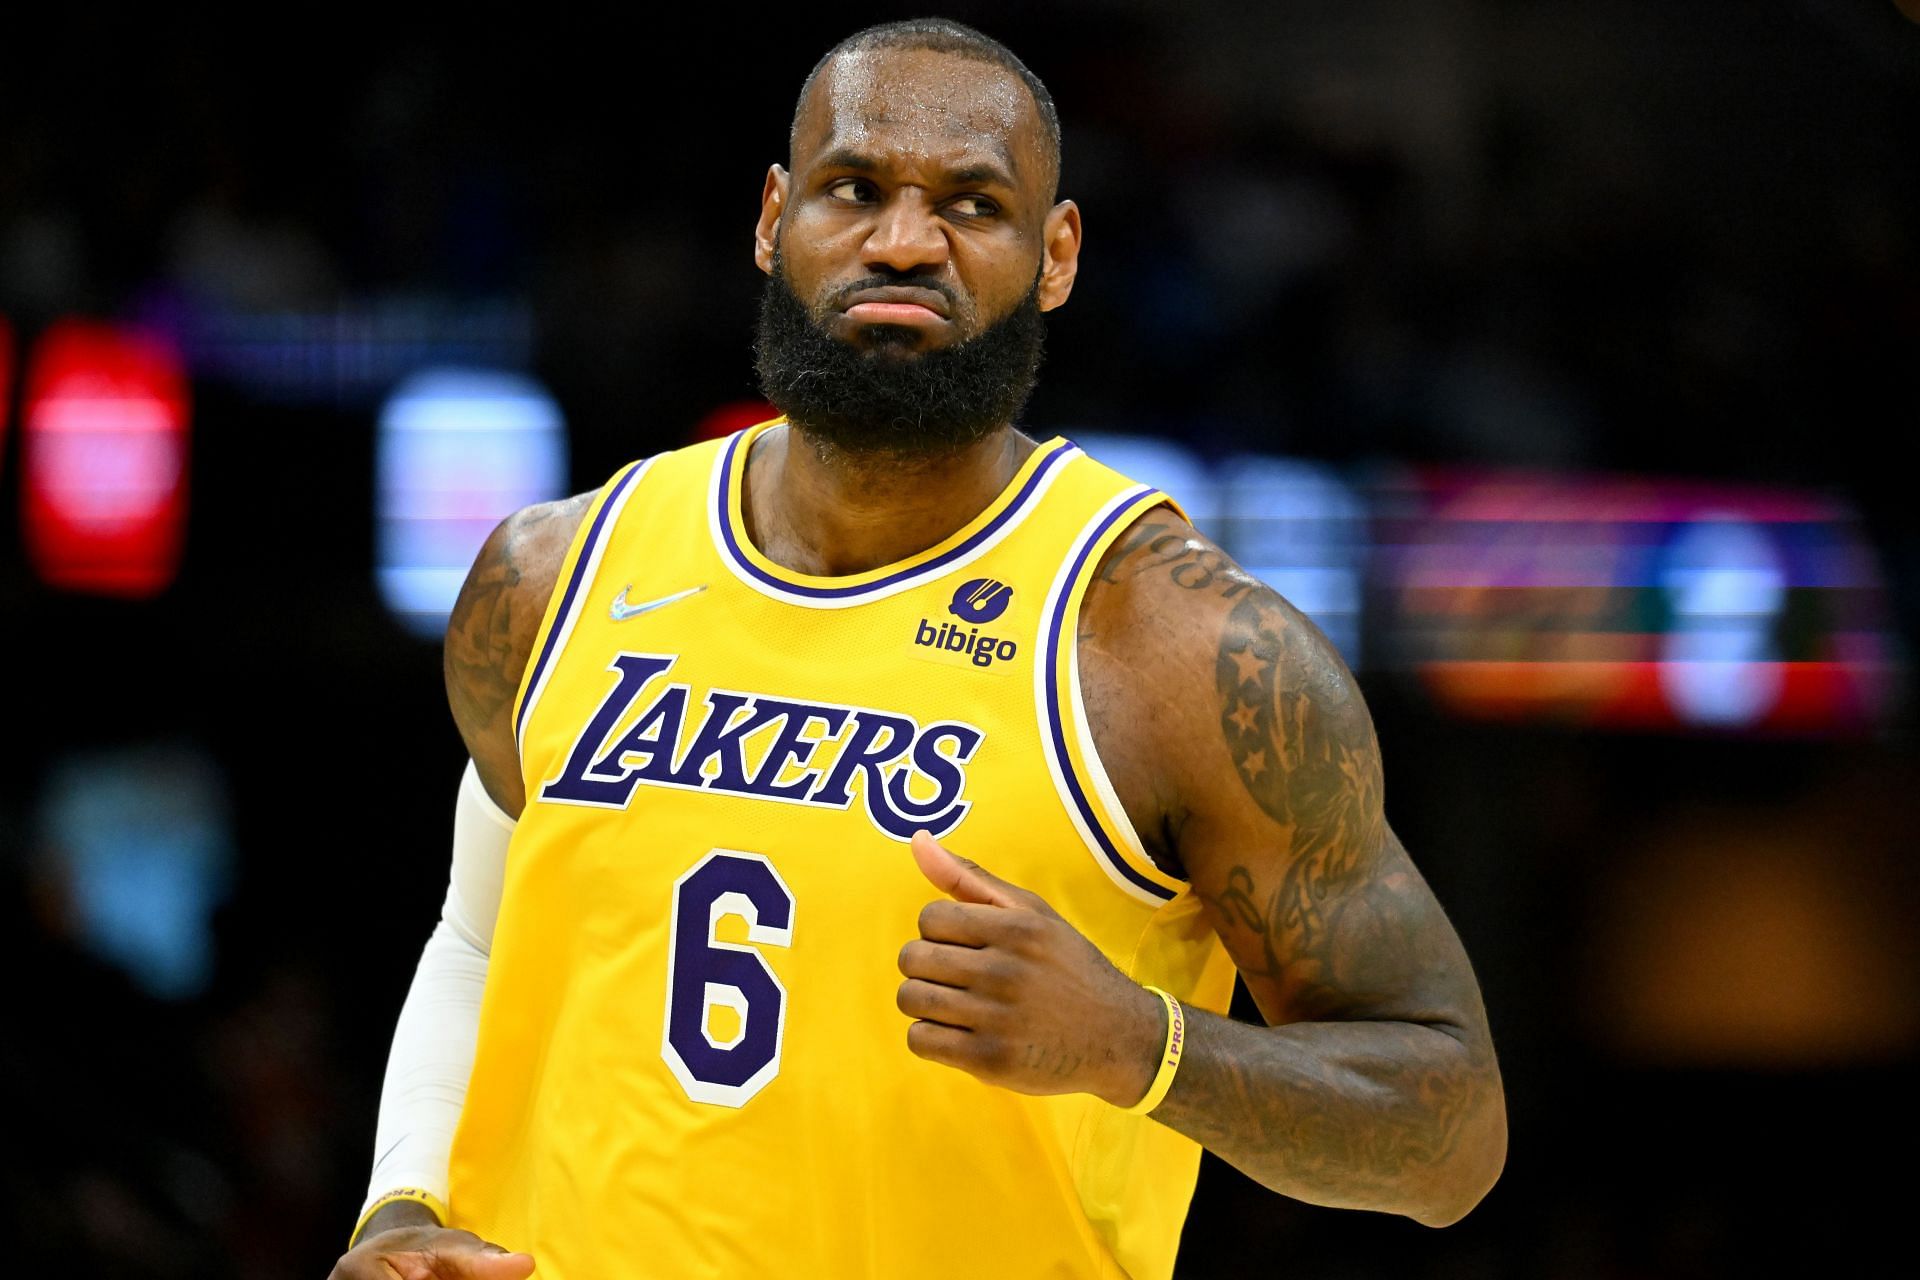 LeBron James of the LA Lakers has agreed to a contract extension.